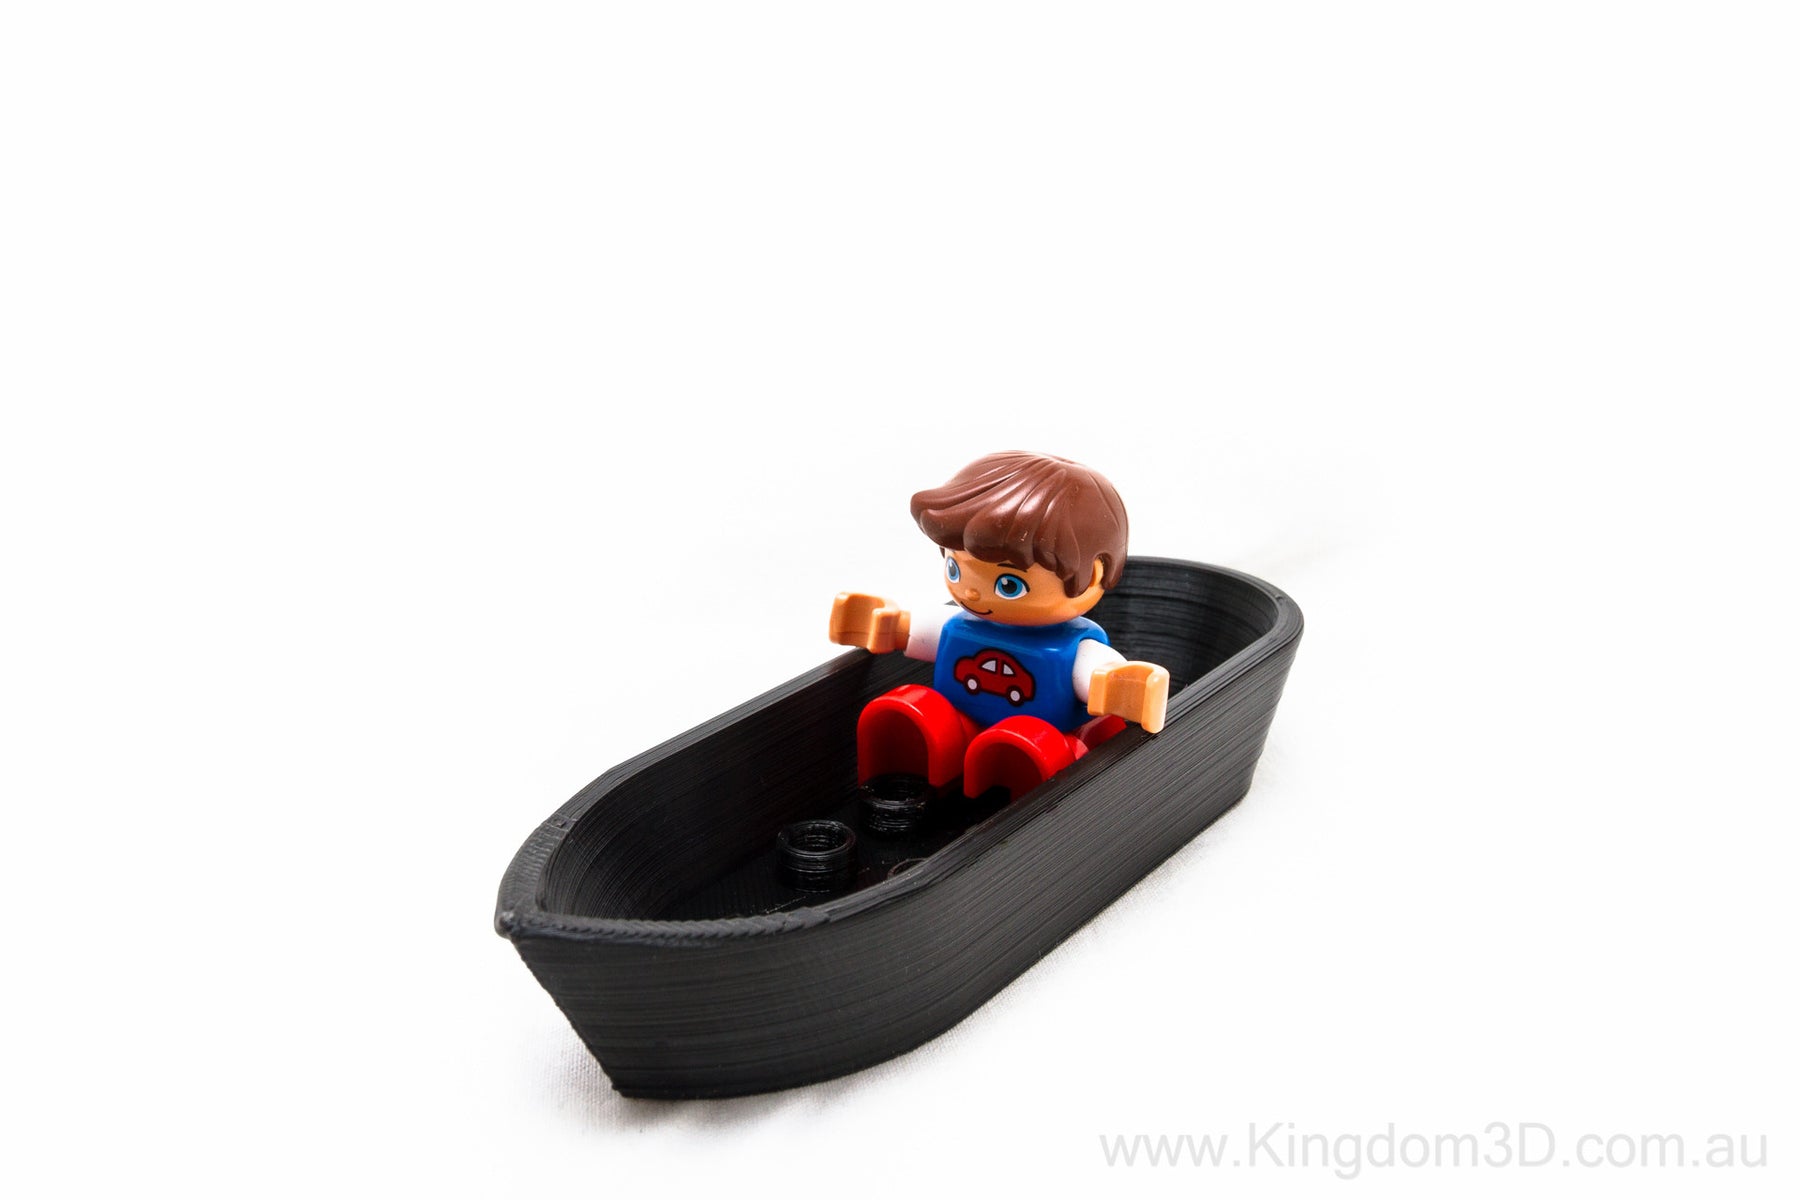 Duplo Compatible Boat by markmc